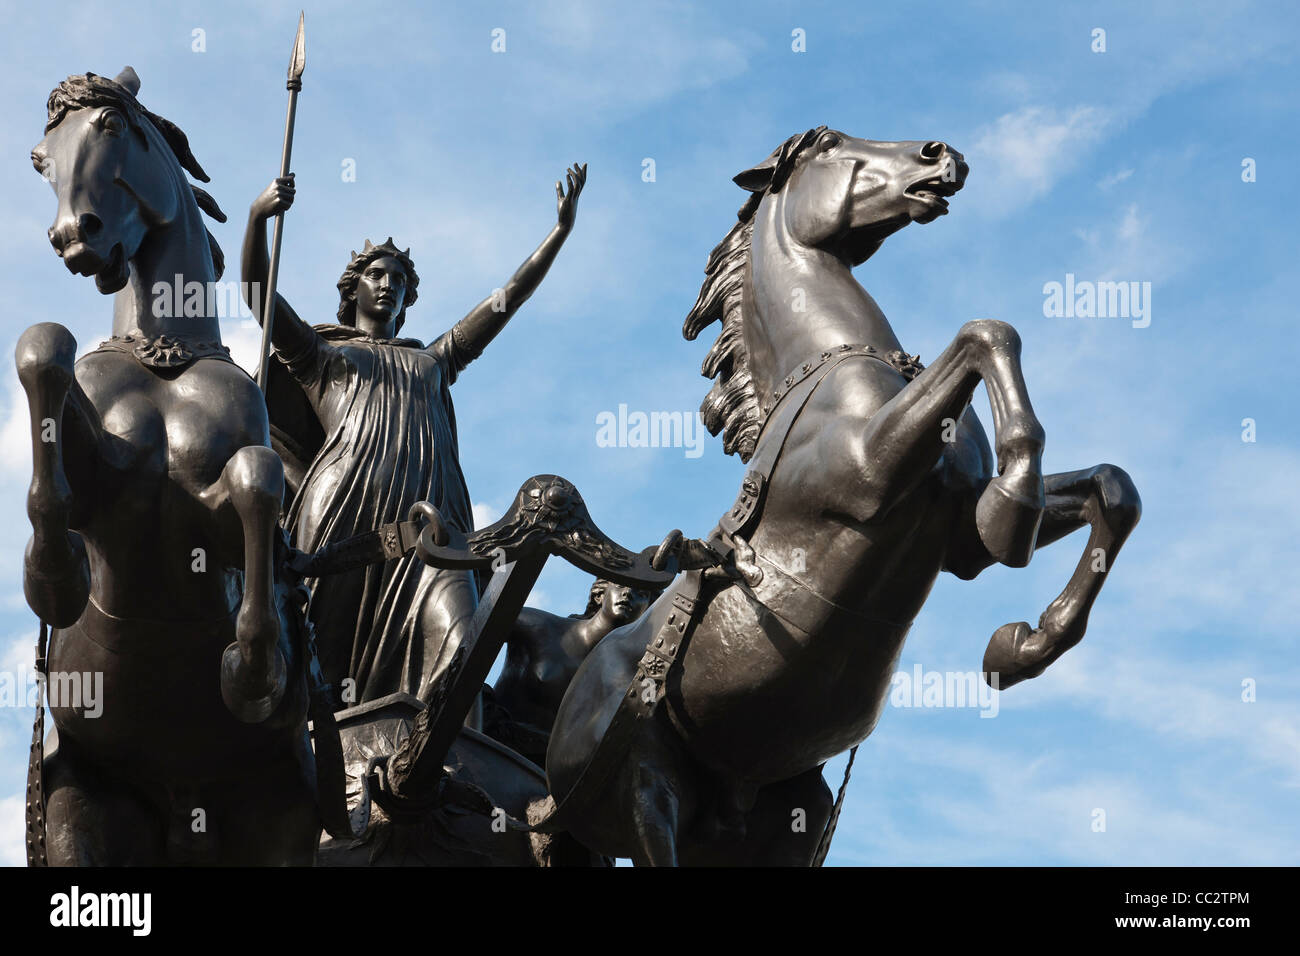 A sculpture depicting the warrior queen Boudica of the Iceni with her daughters, near Westminster Pier, London, England. Stock Photo